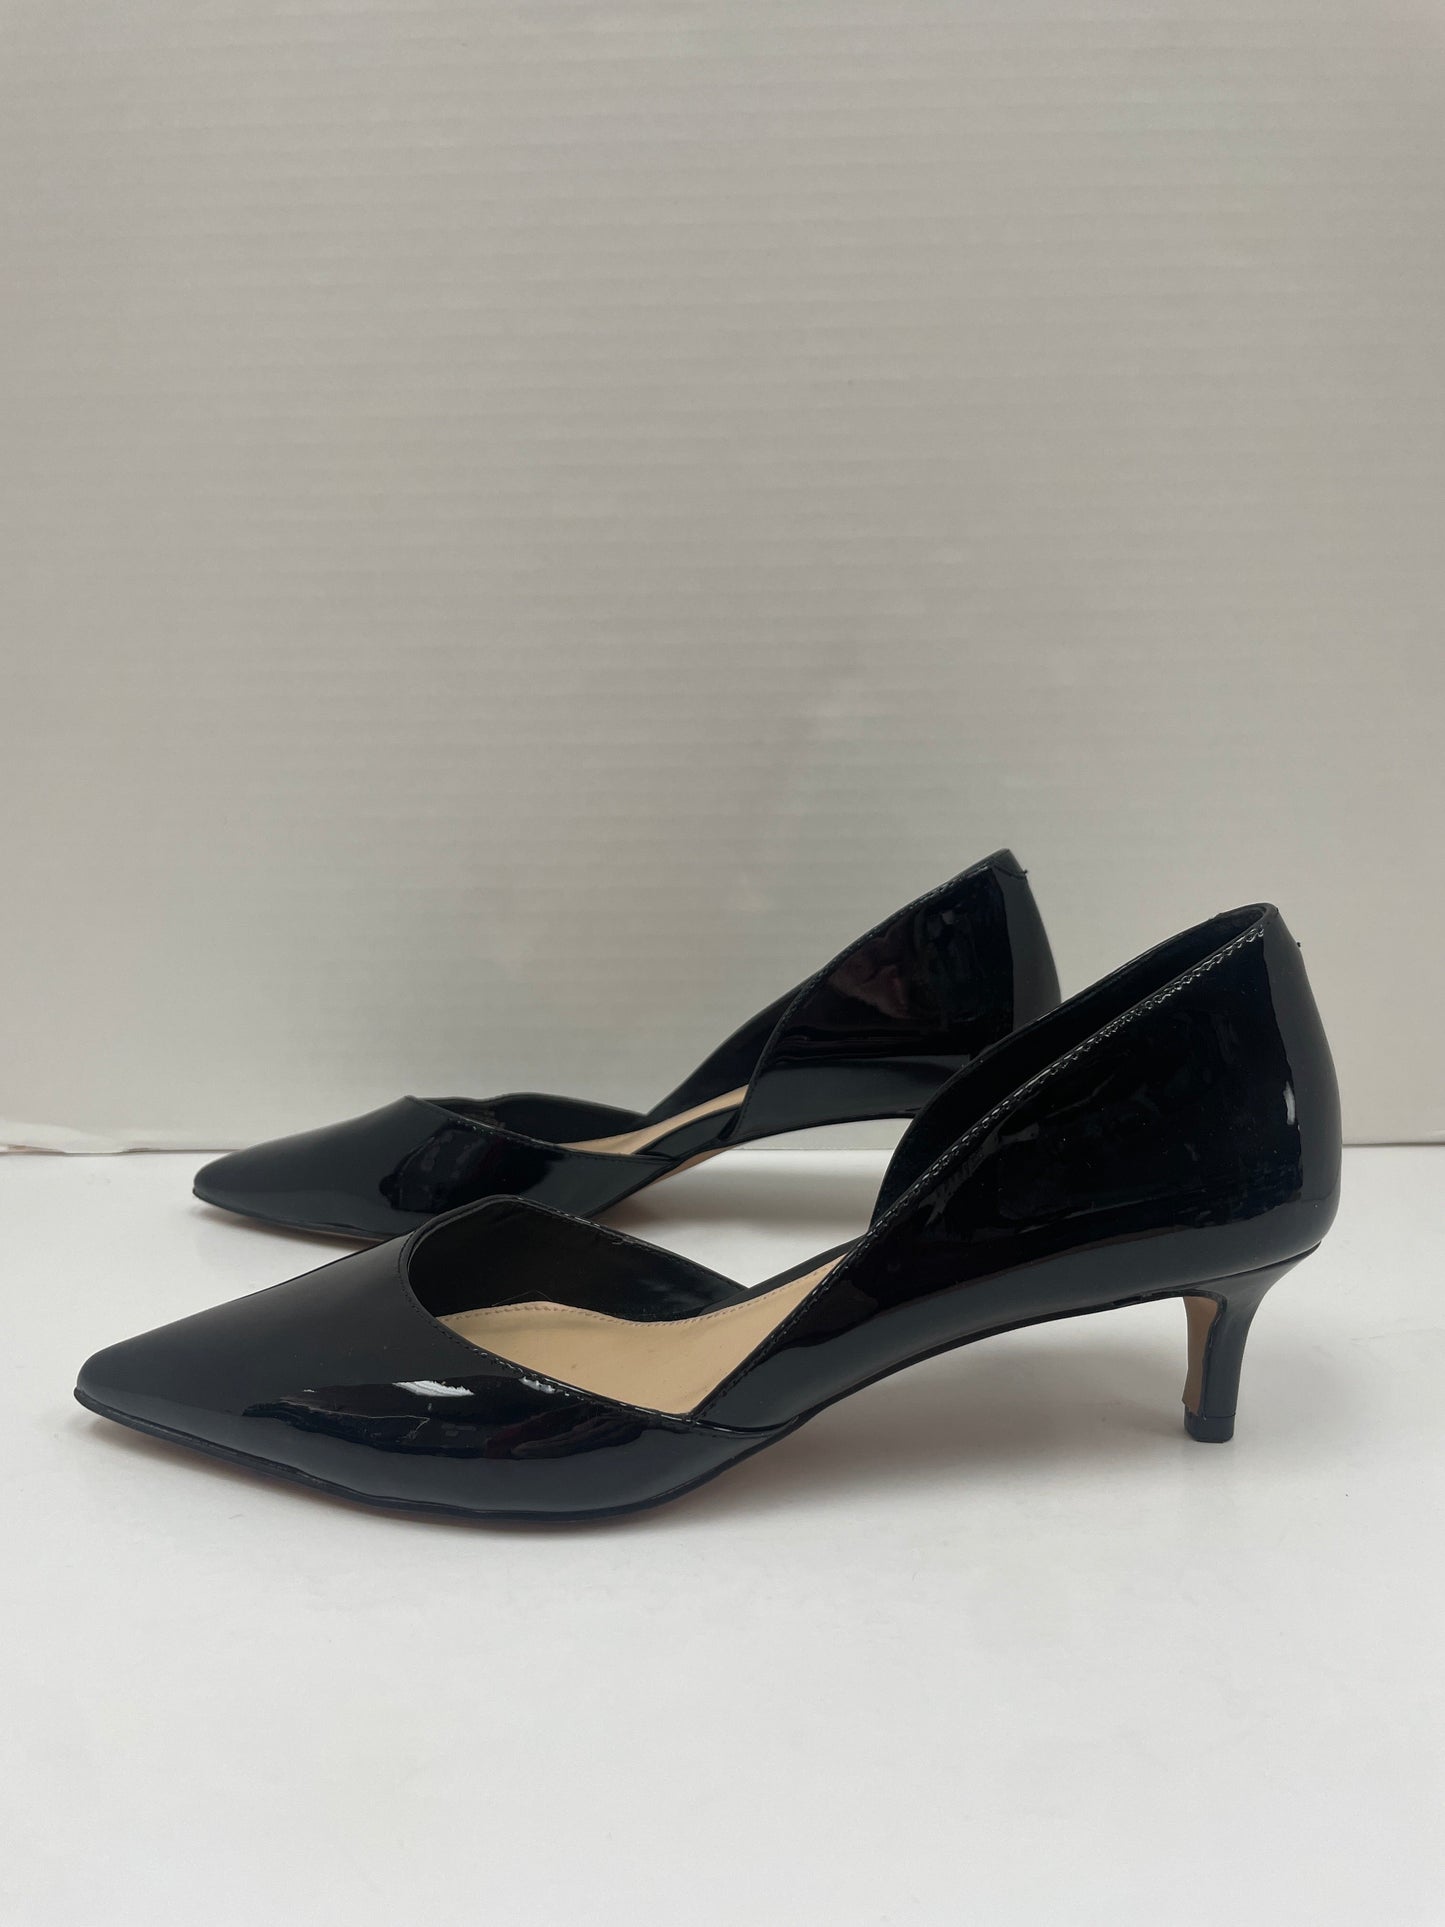 Shoes Heels Kitten By Vince Camuto  Size: 7.5